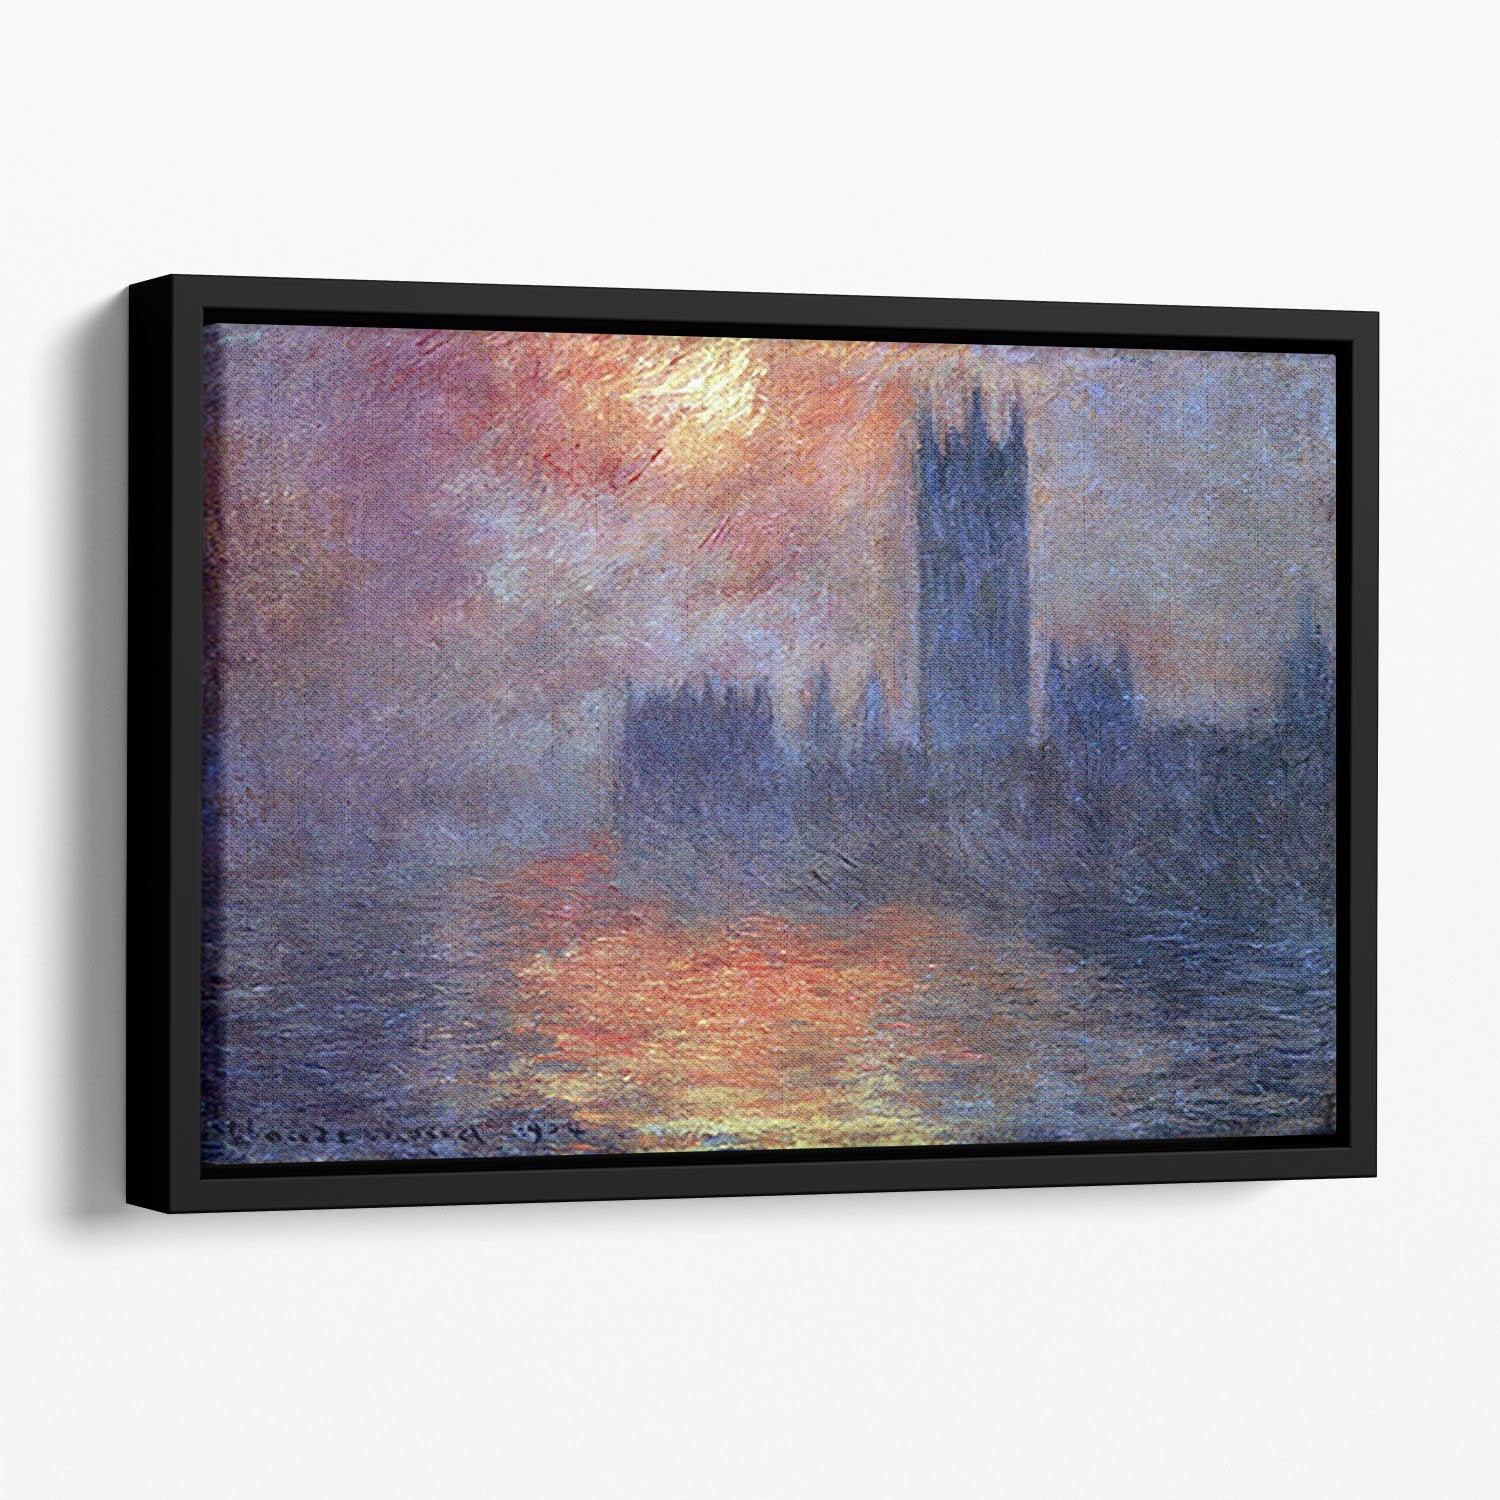 The Houses of Parliament Sunset by Monet Floating Framed Canvas